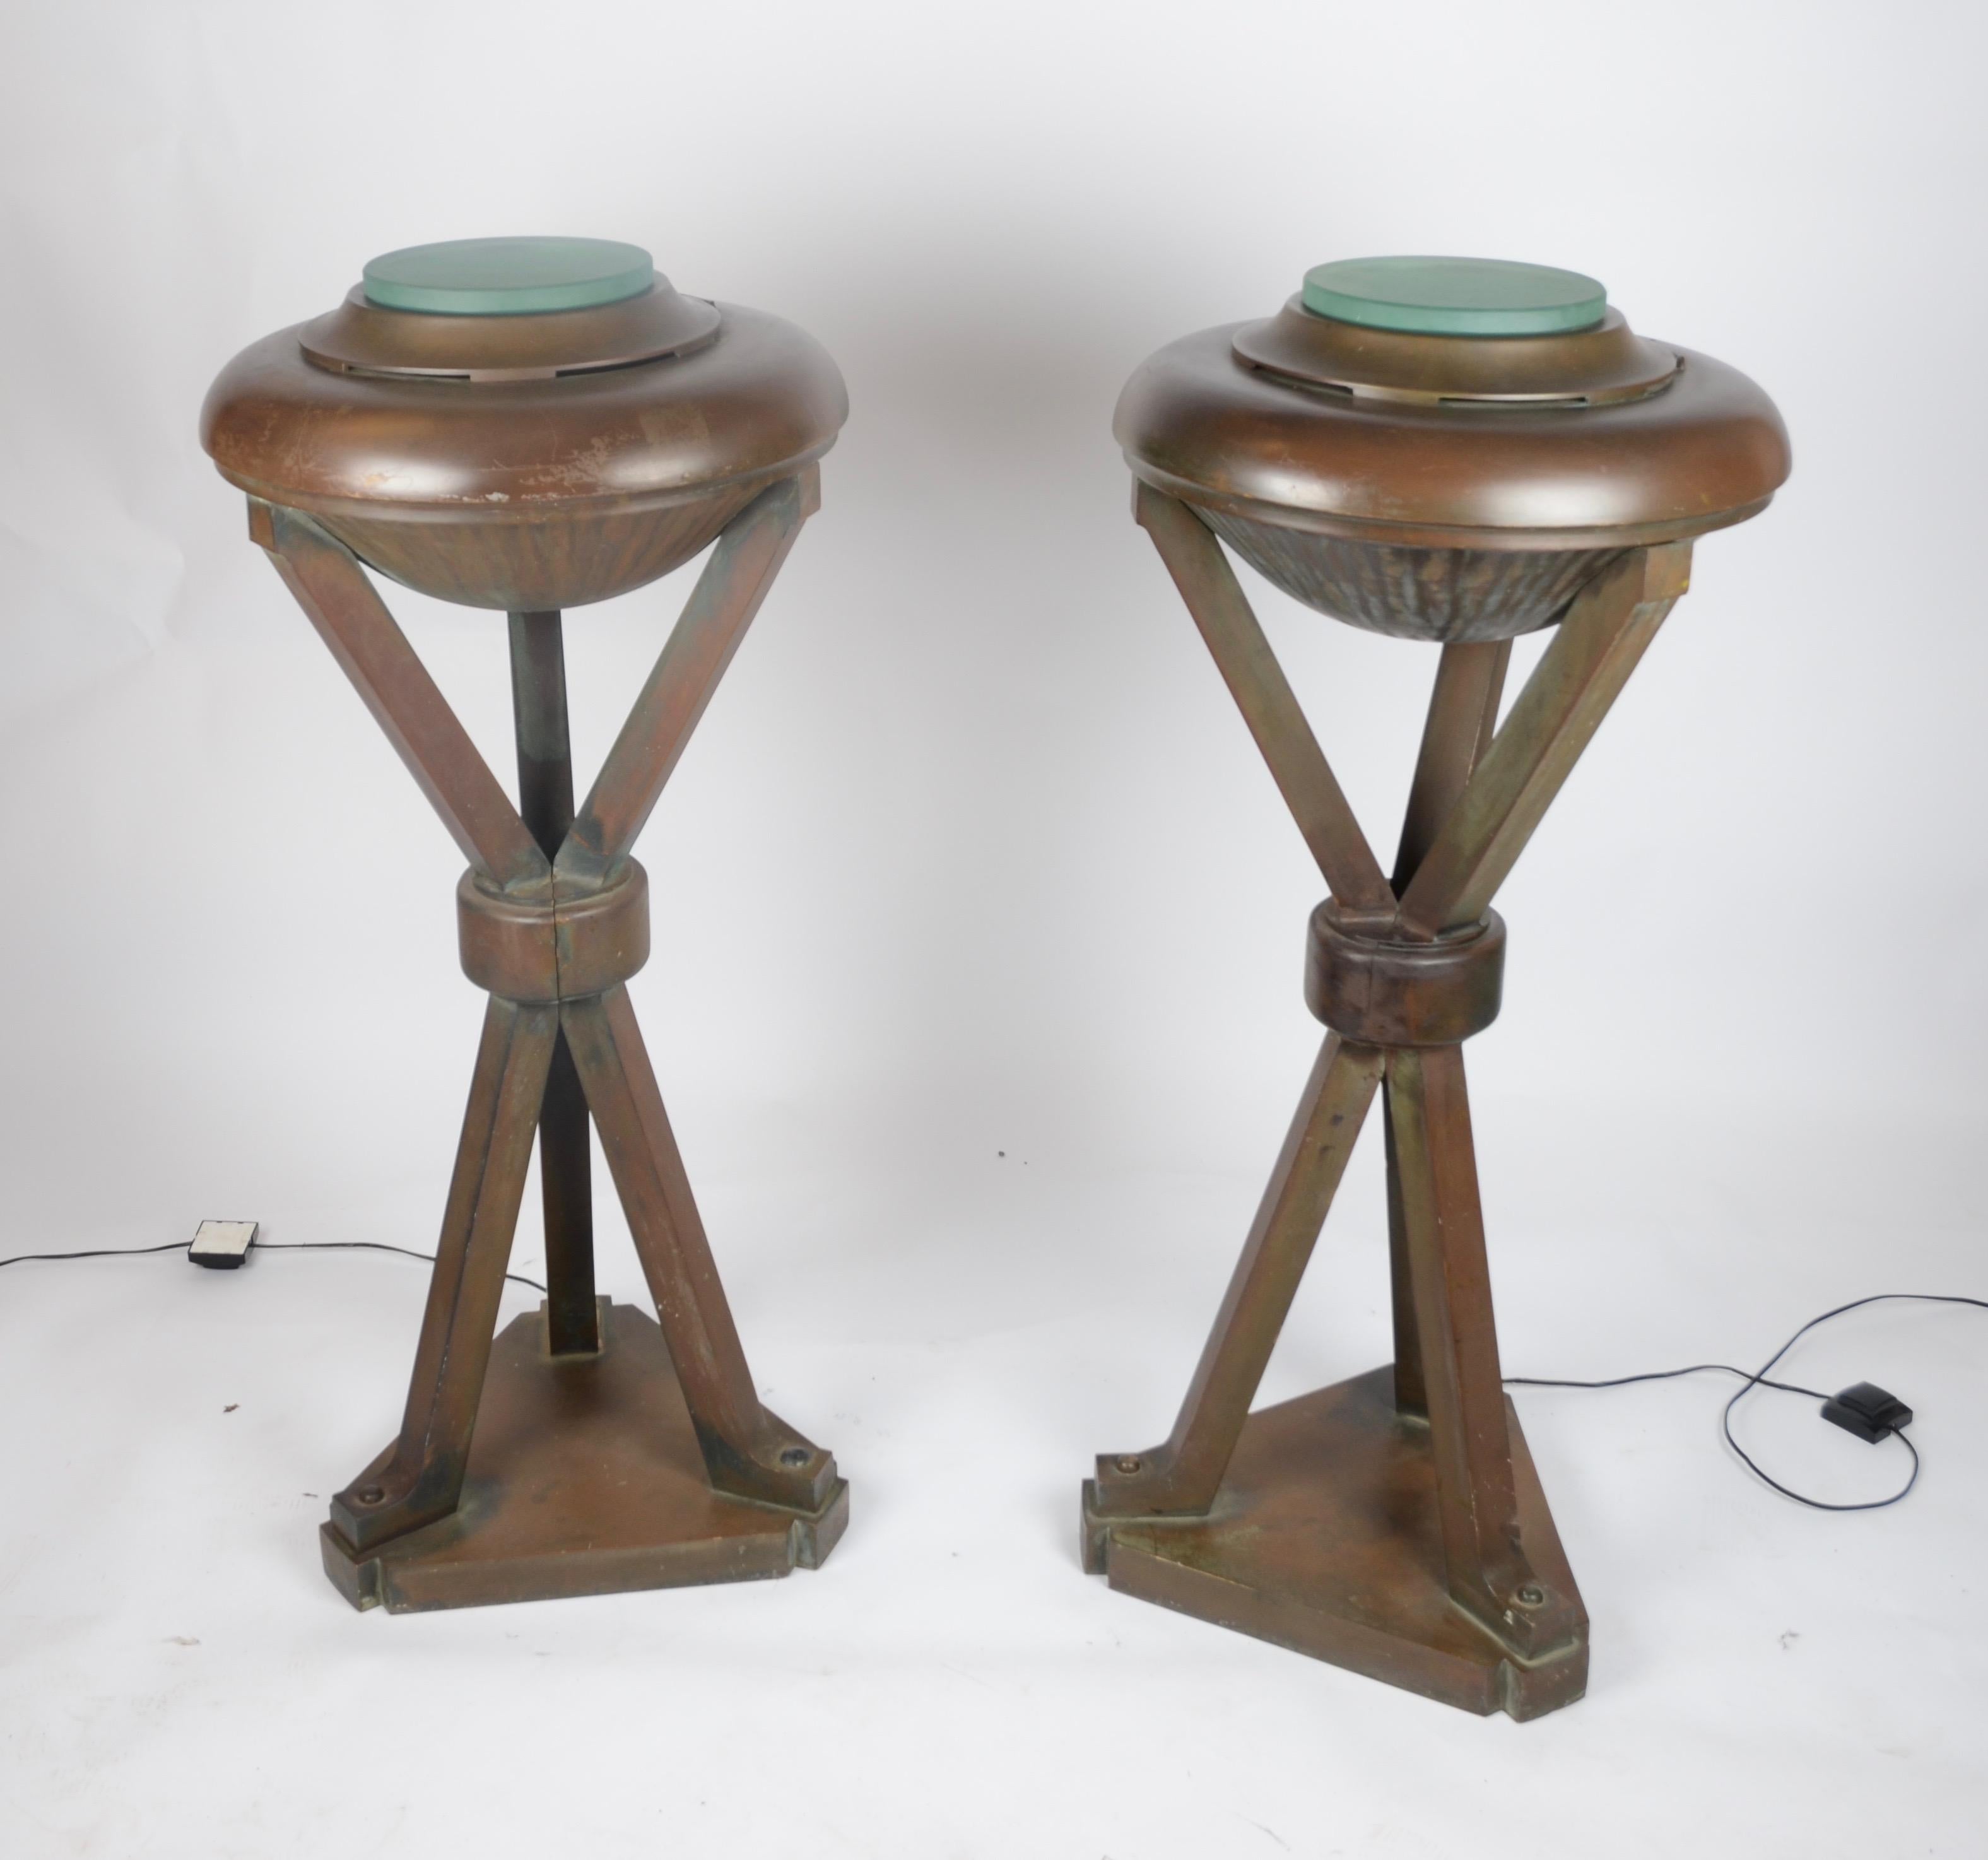 Rare and heavy floor lamps / uplights in bronze and glass, 1920s-1930s. Measure: Height 112 cm. 


Very heavy!